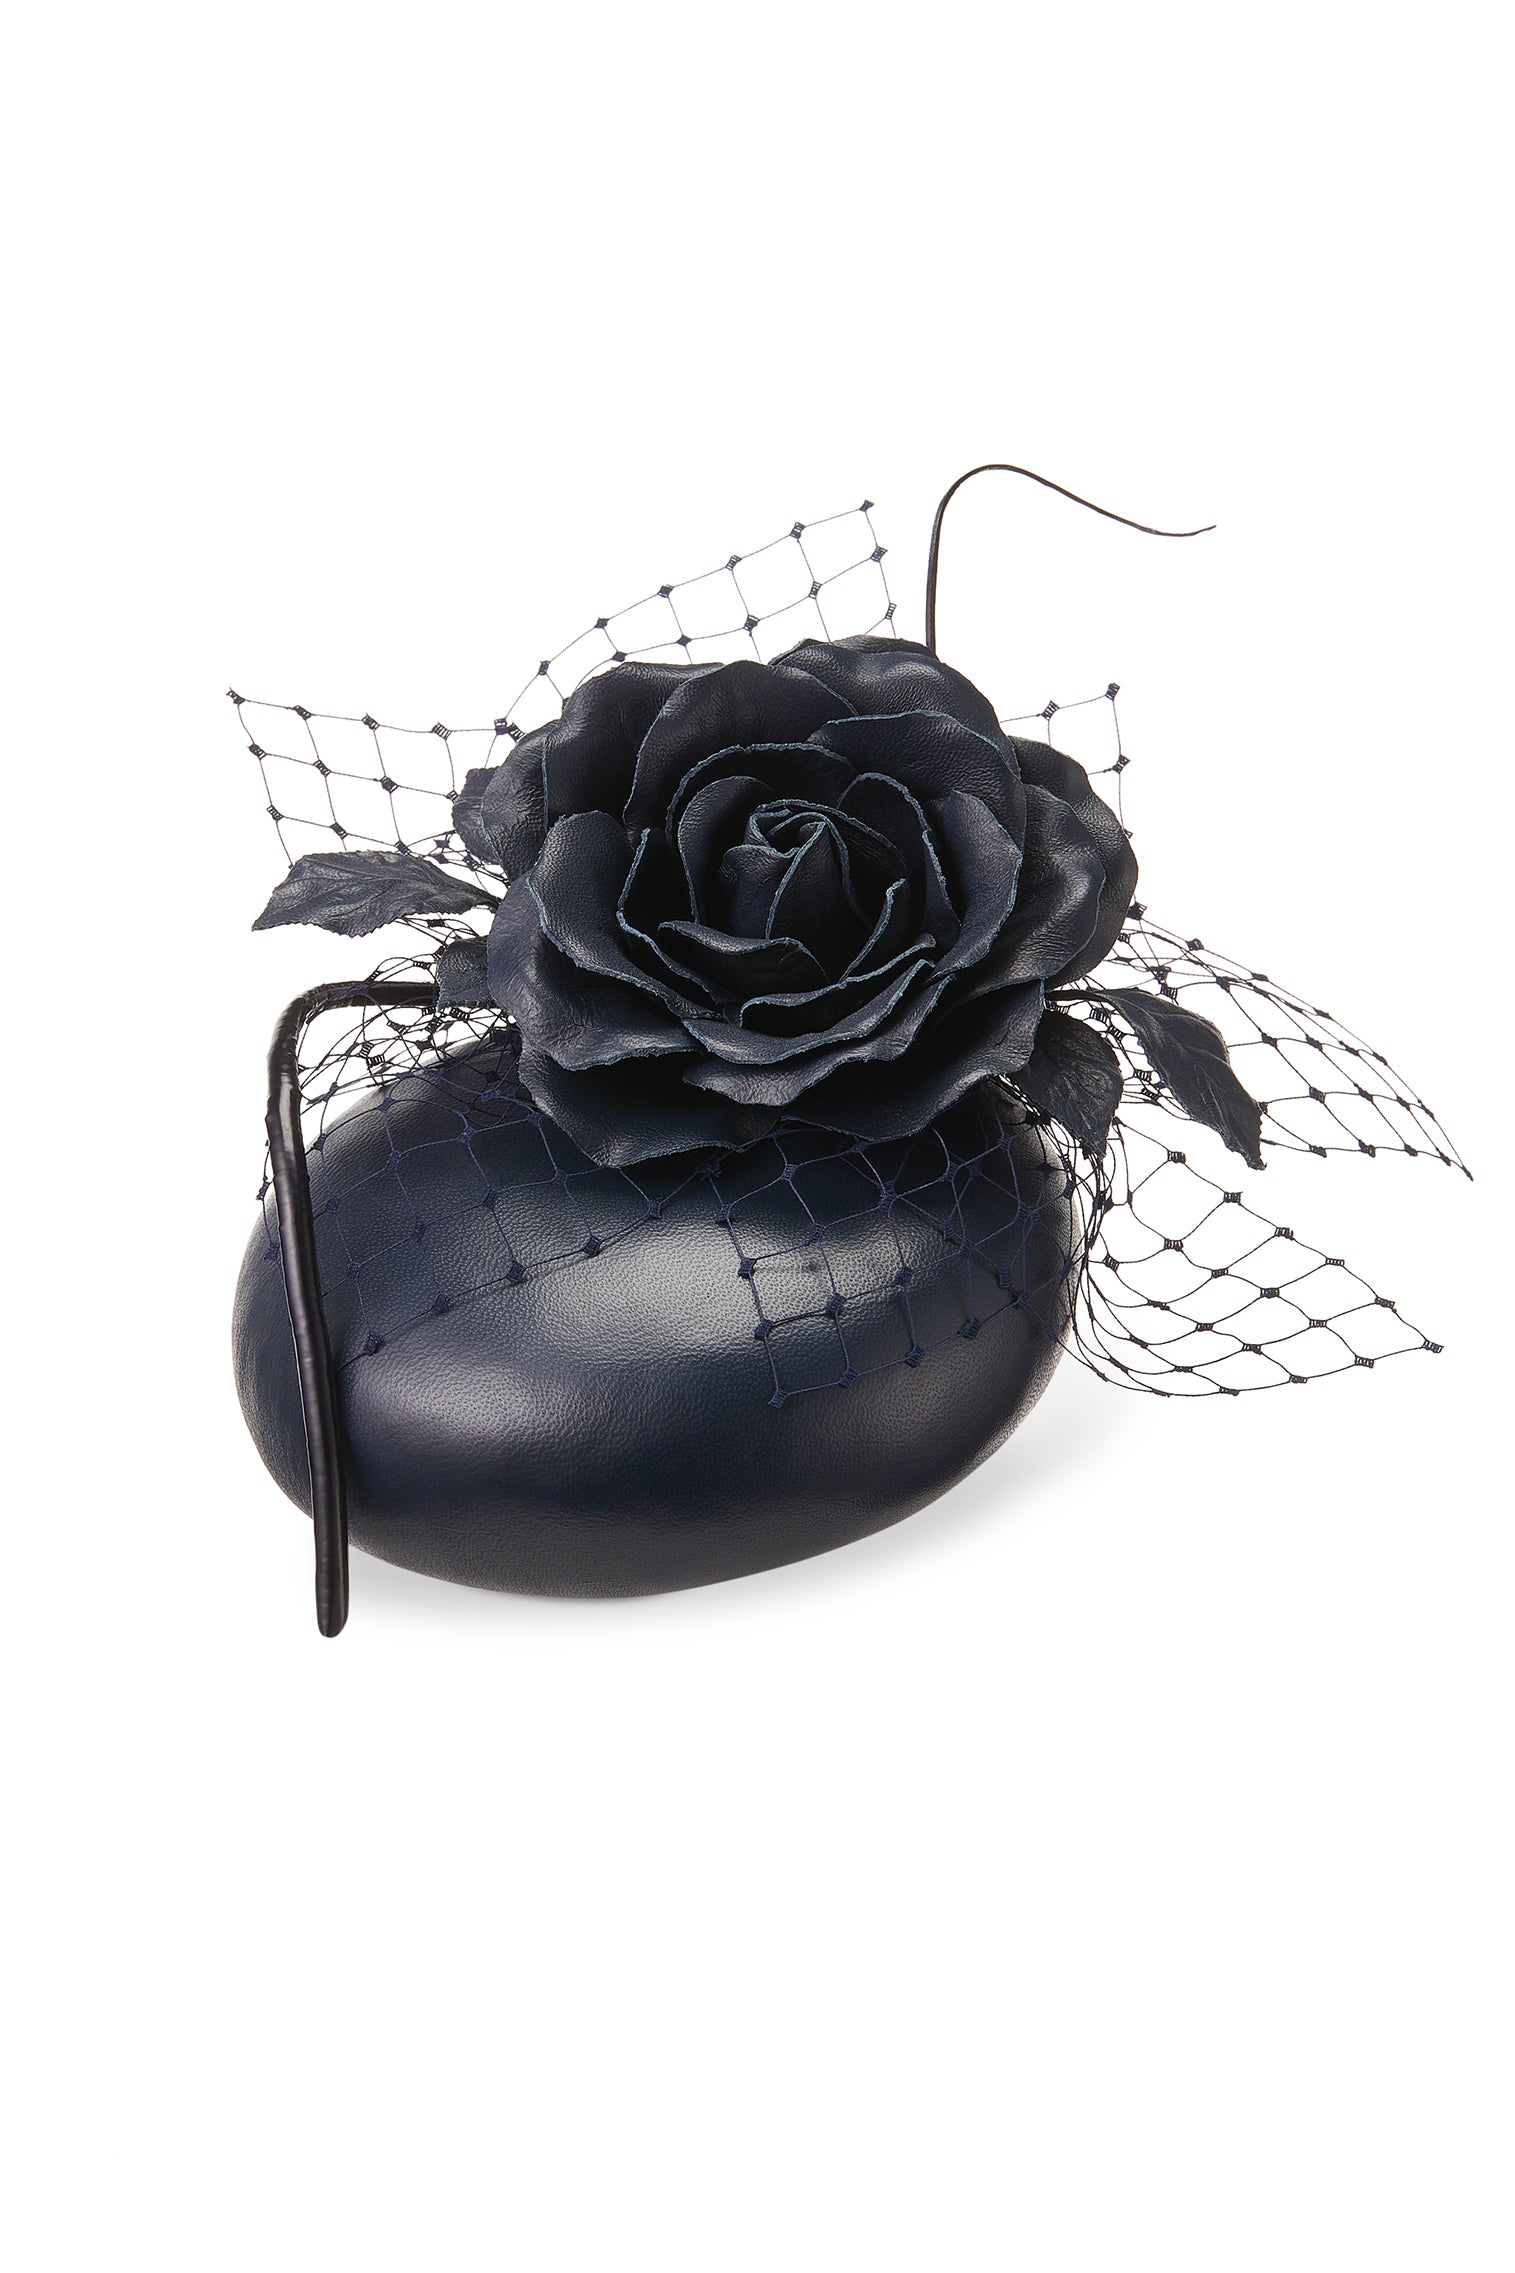 Rose Bud Navy Leather Percher Hat - Lock Couture by Awon Golding - Lock & Co. Hatters London UK